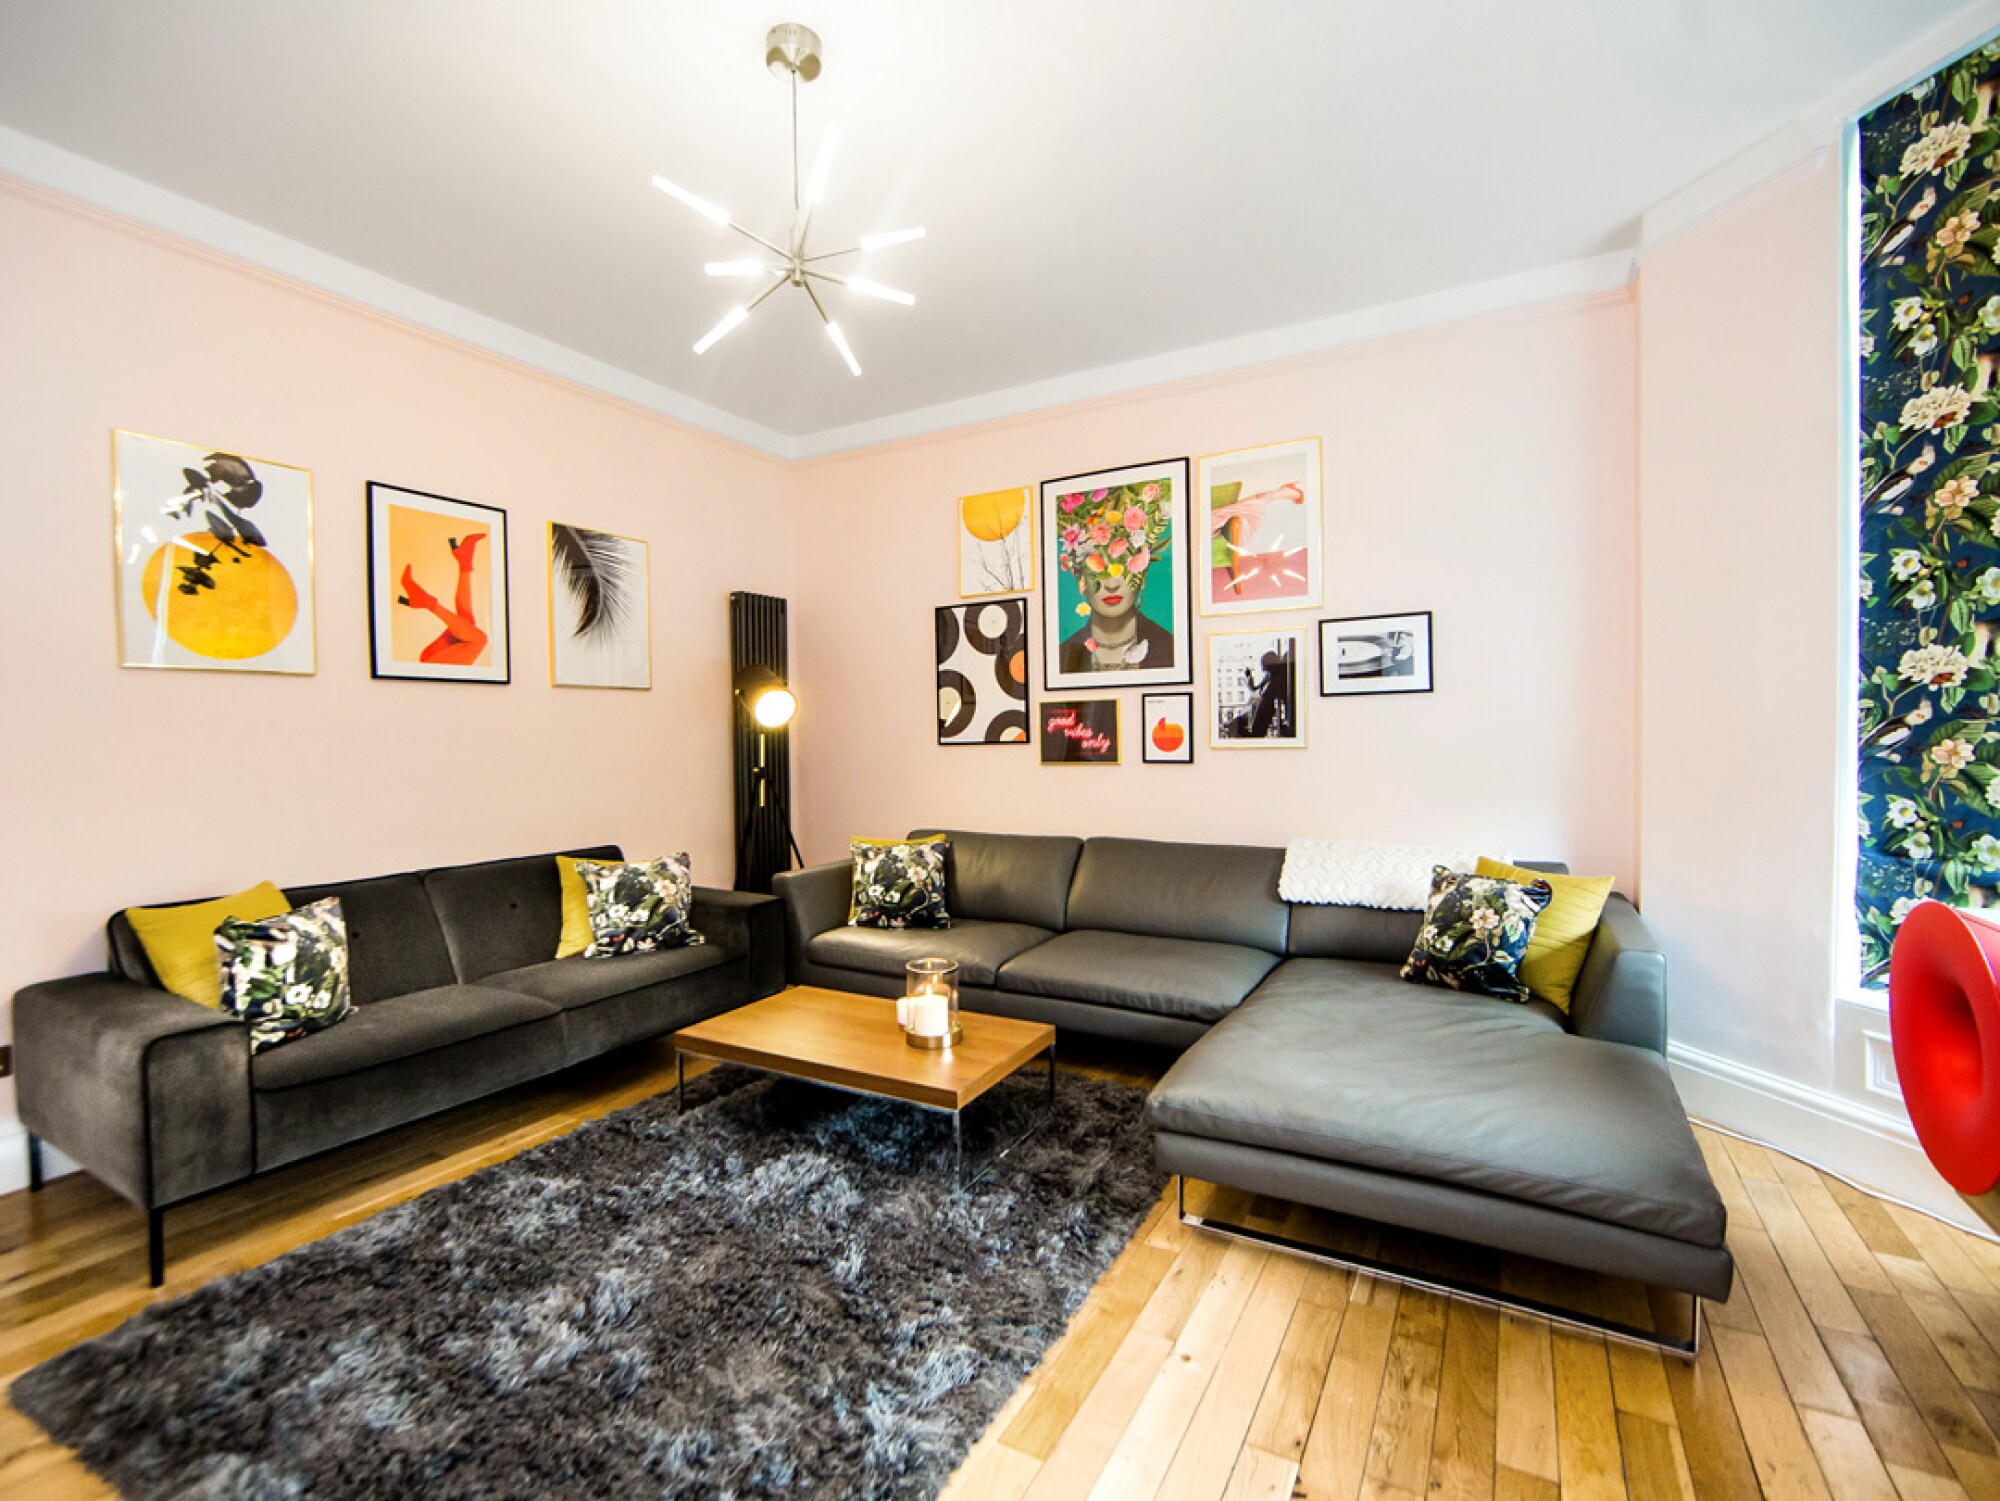 Property Image 1 - Contemporary Stylish Apartment on Two Floors - Central Harrogate